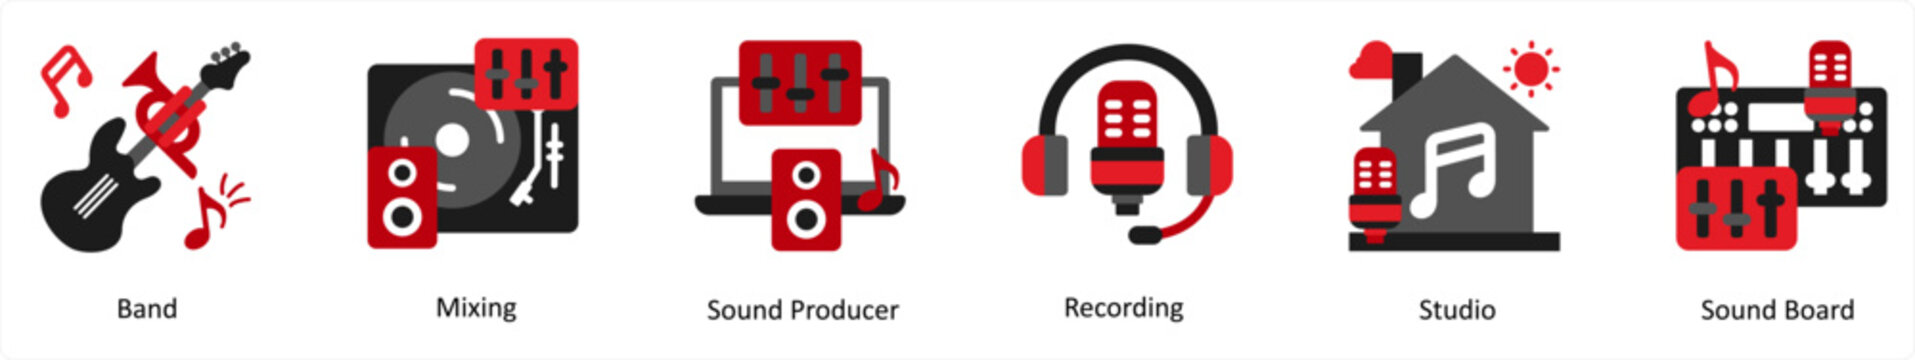 Six music icons in red and black as band, mixing, sound producer